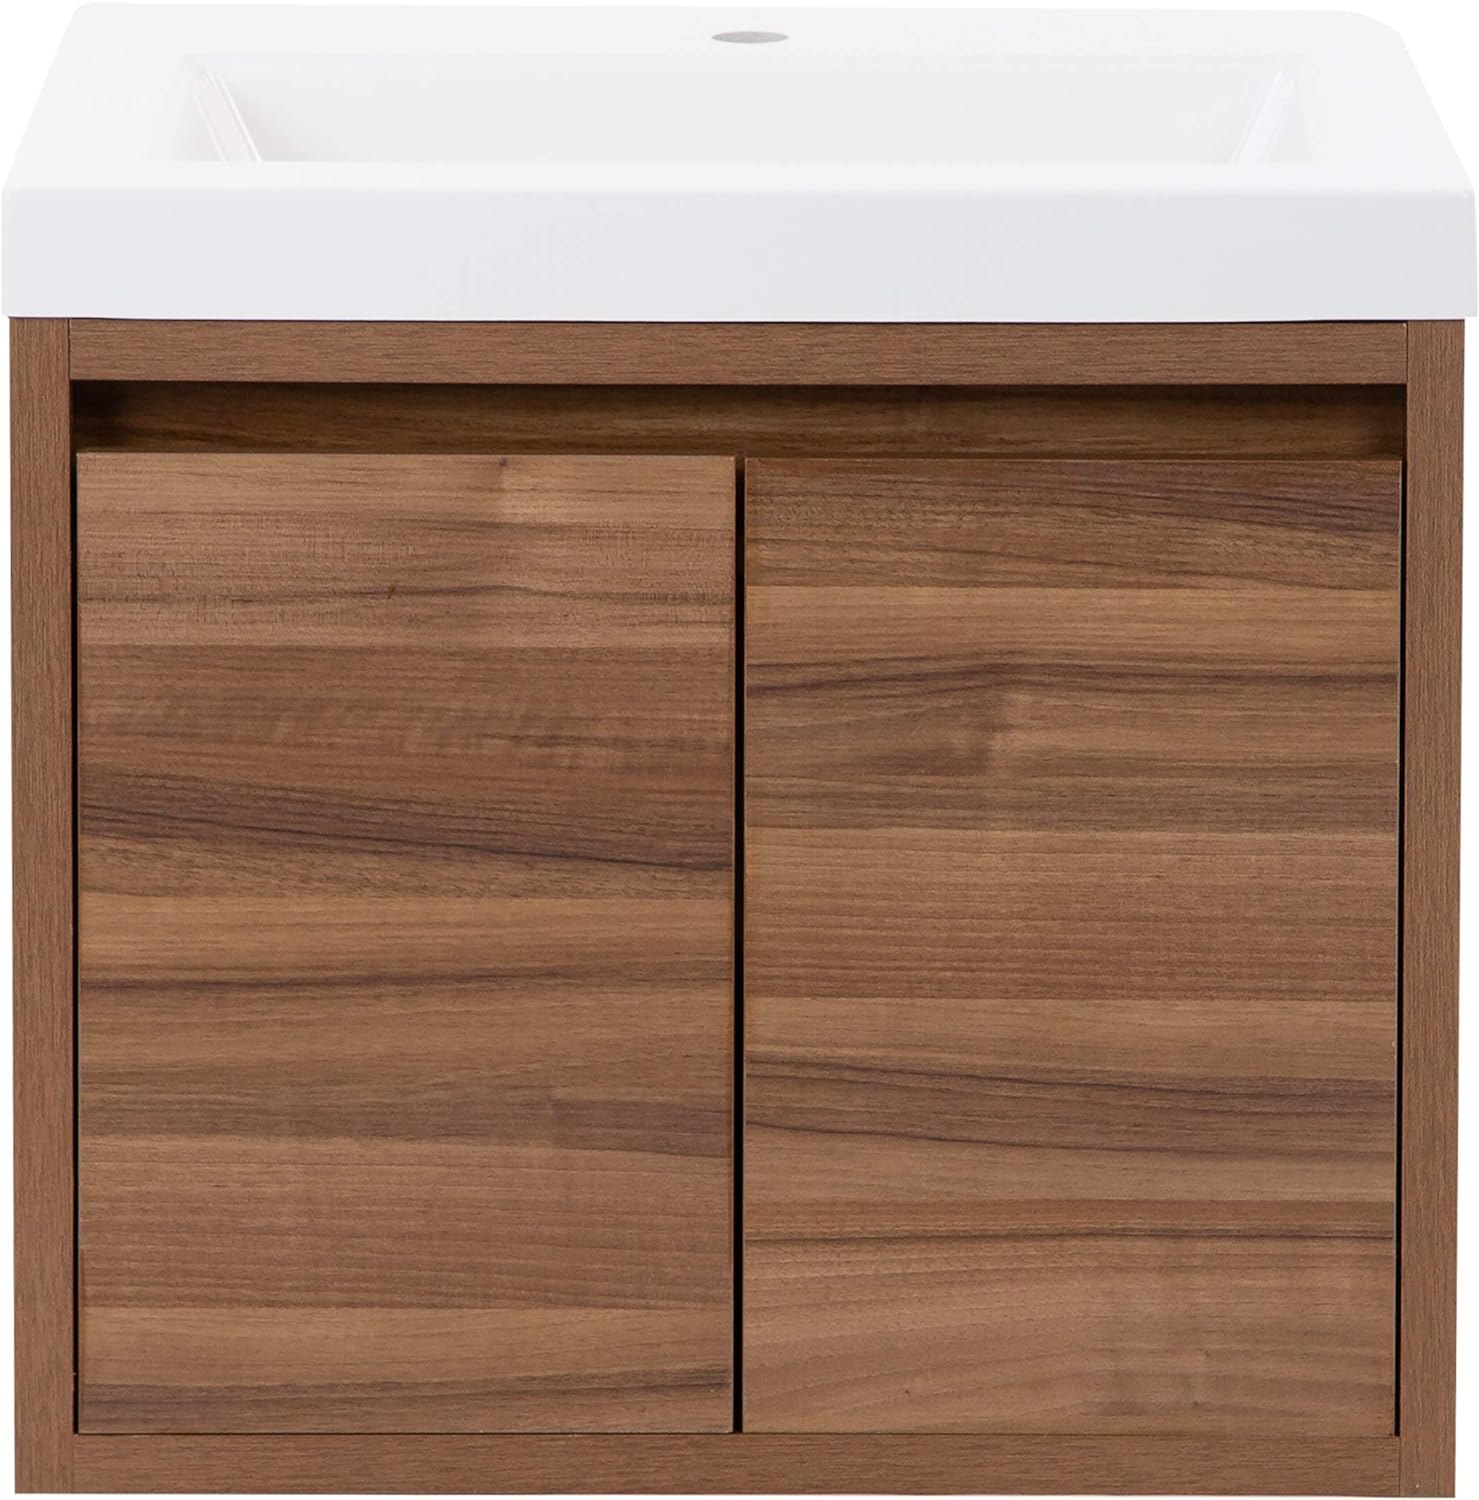 Spring Mill Cabinets Kelby Modern Floating Bathroom Vanity with 2-Door Cabinet Sink Top, 24.5 W x 18.75 D x 22.25 H, Brown and White